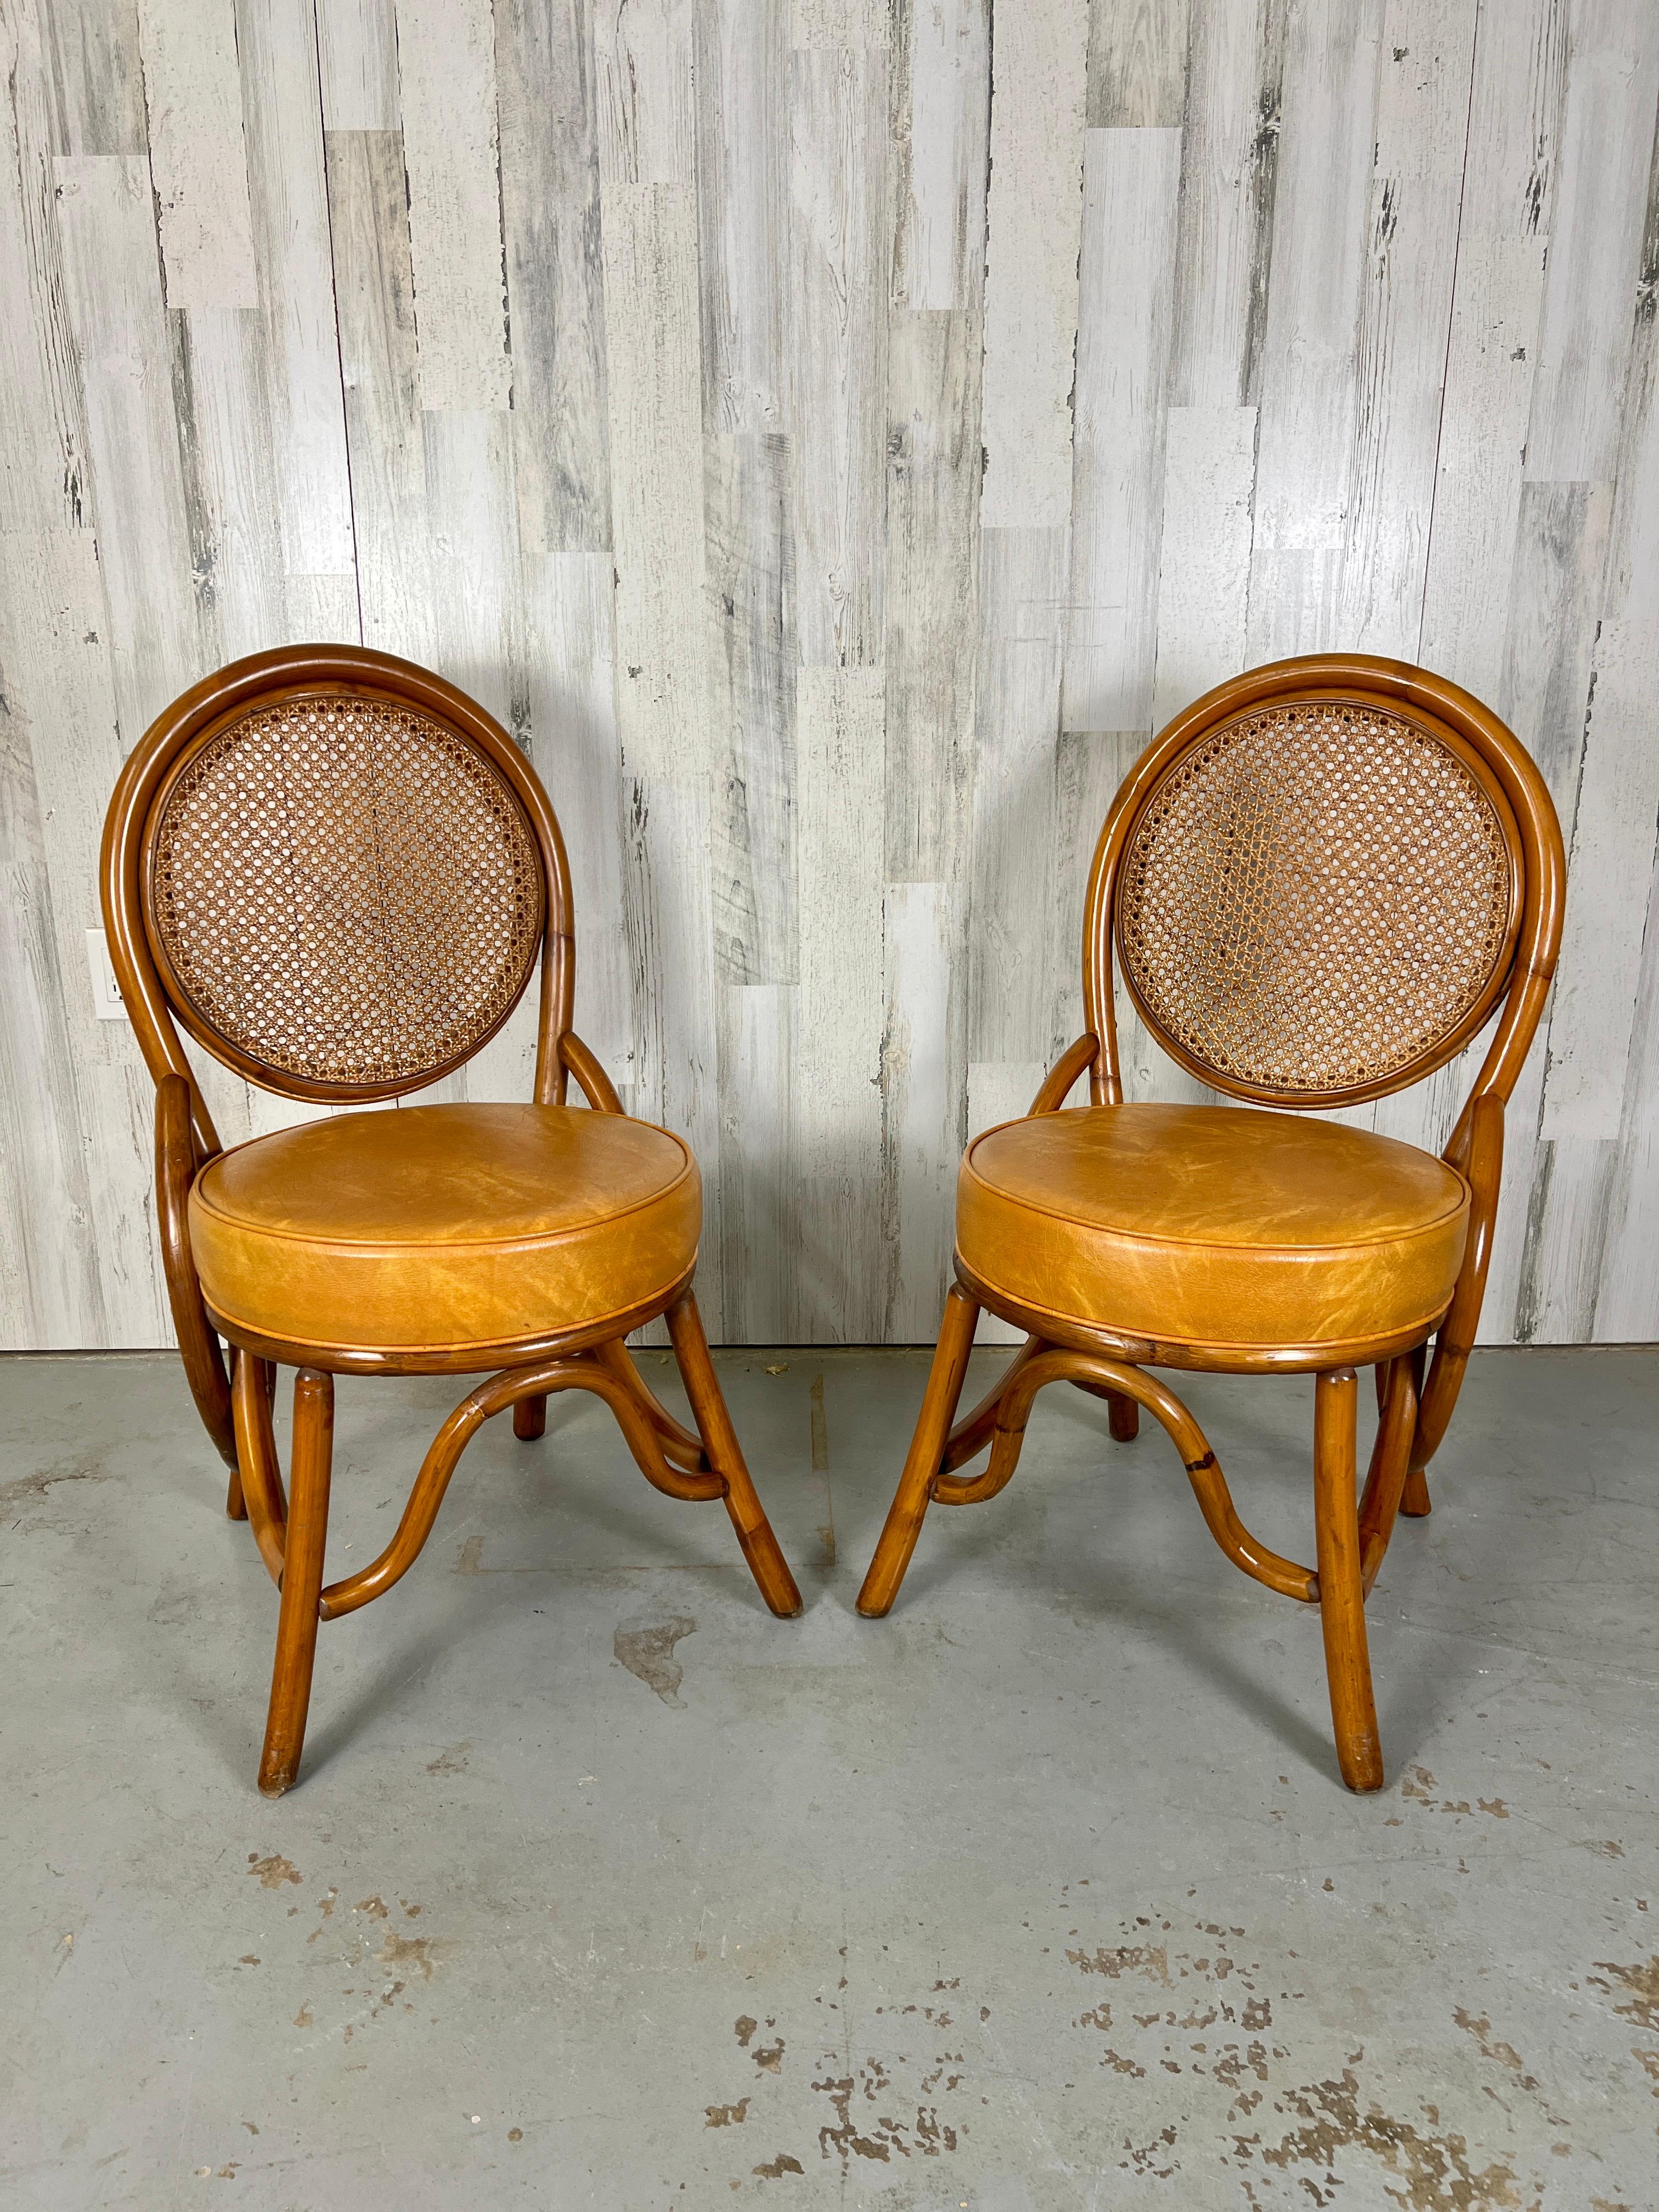 Rattan & woven cane back dining chairs. These chairs have a very nice original cognac naugahyde seats.